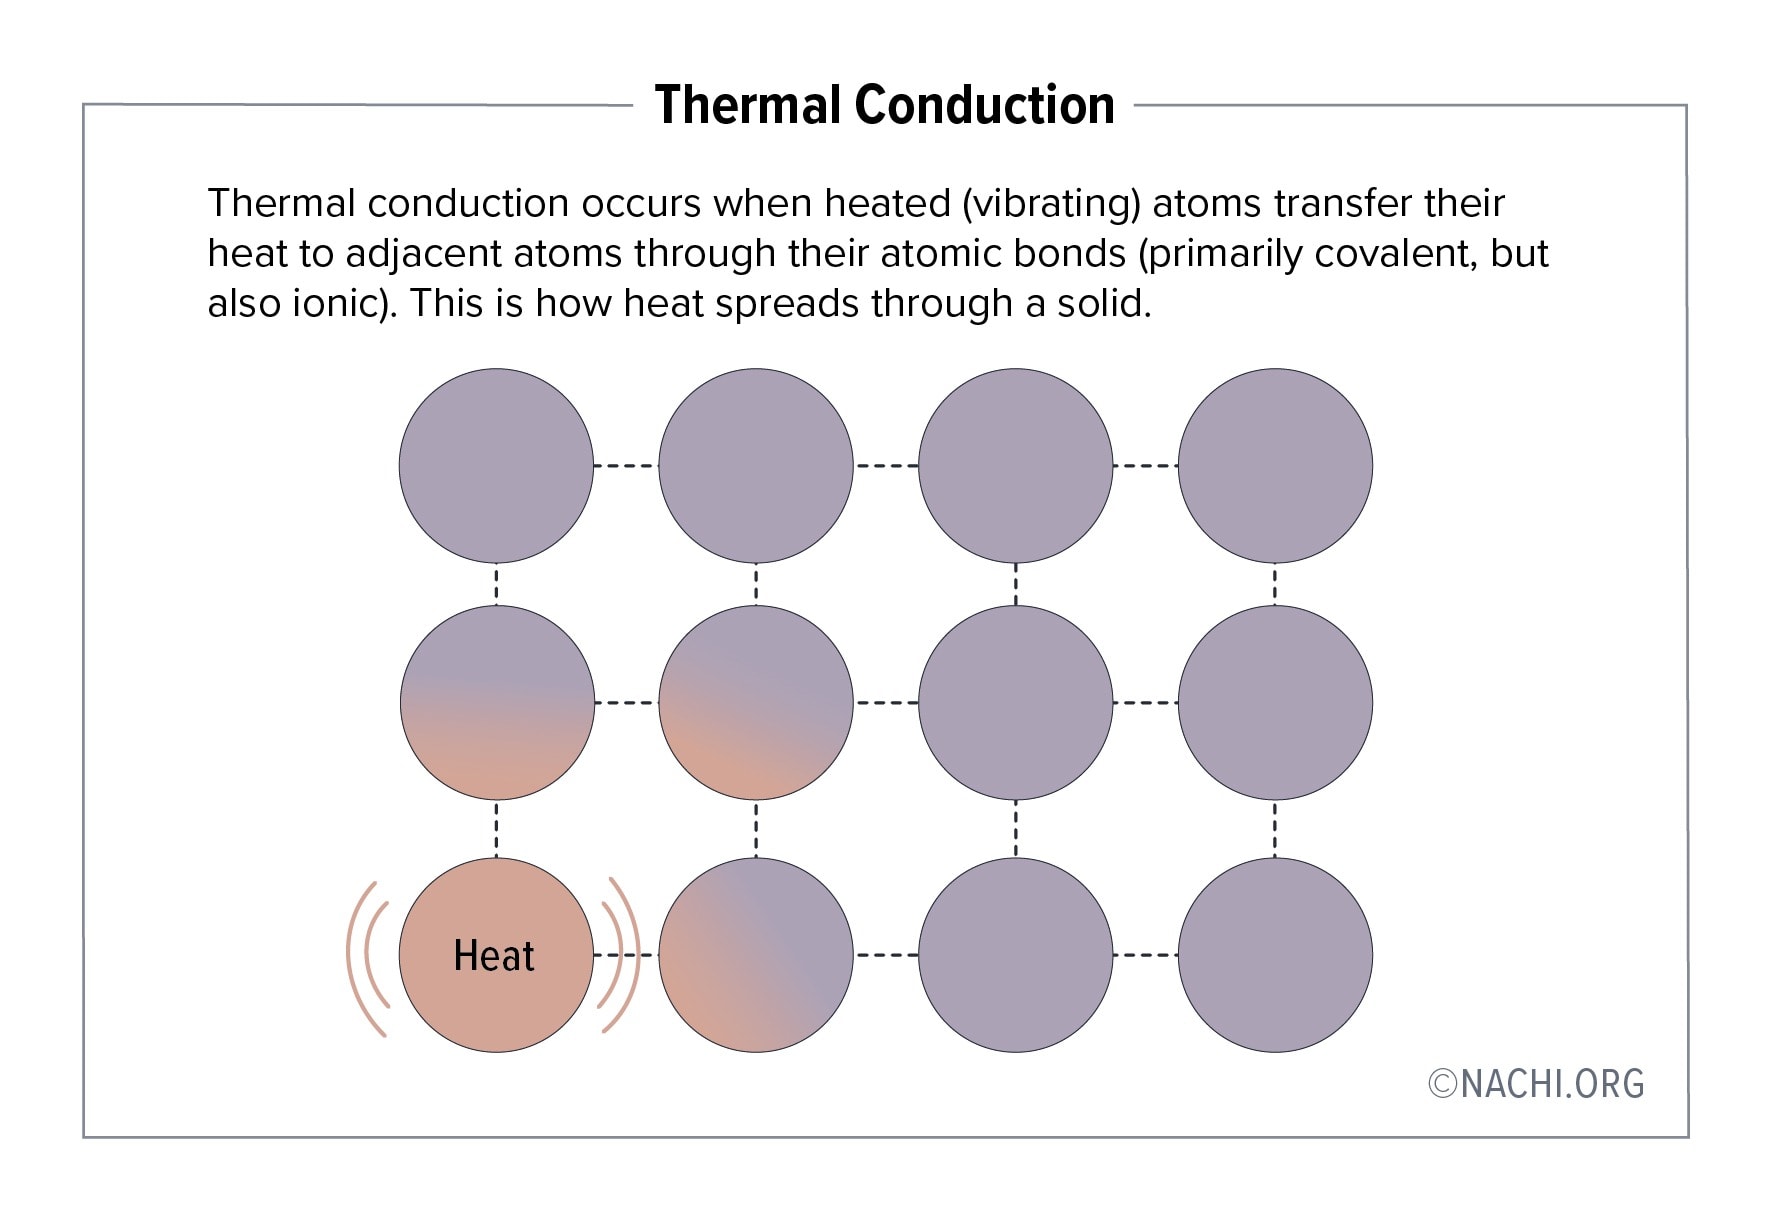 Thermal conduction occurs when heated (vibrating) atoms transfer their heat to adjacent atoms through their atomic bonds (primarily covalent, but also ionic). This is how heat spreads through a solid.